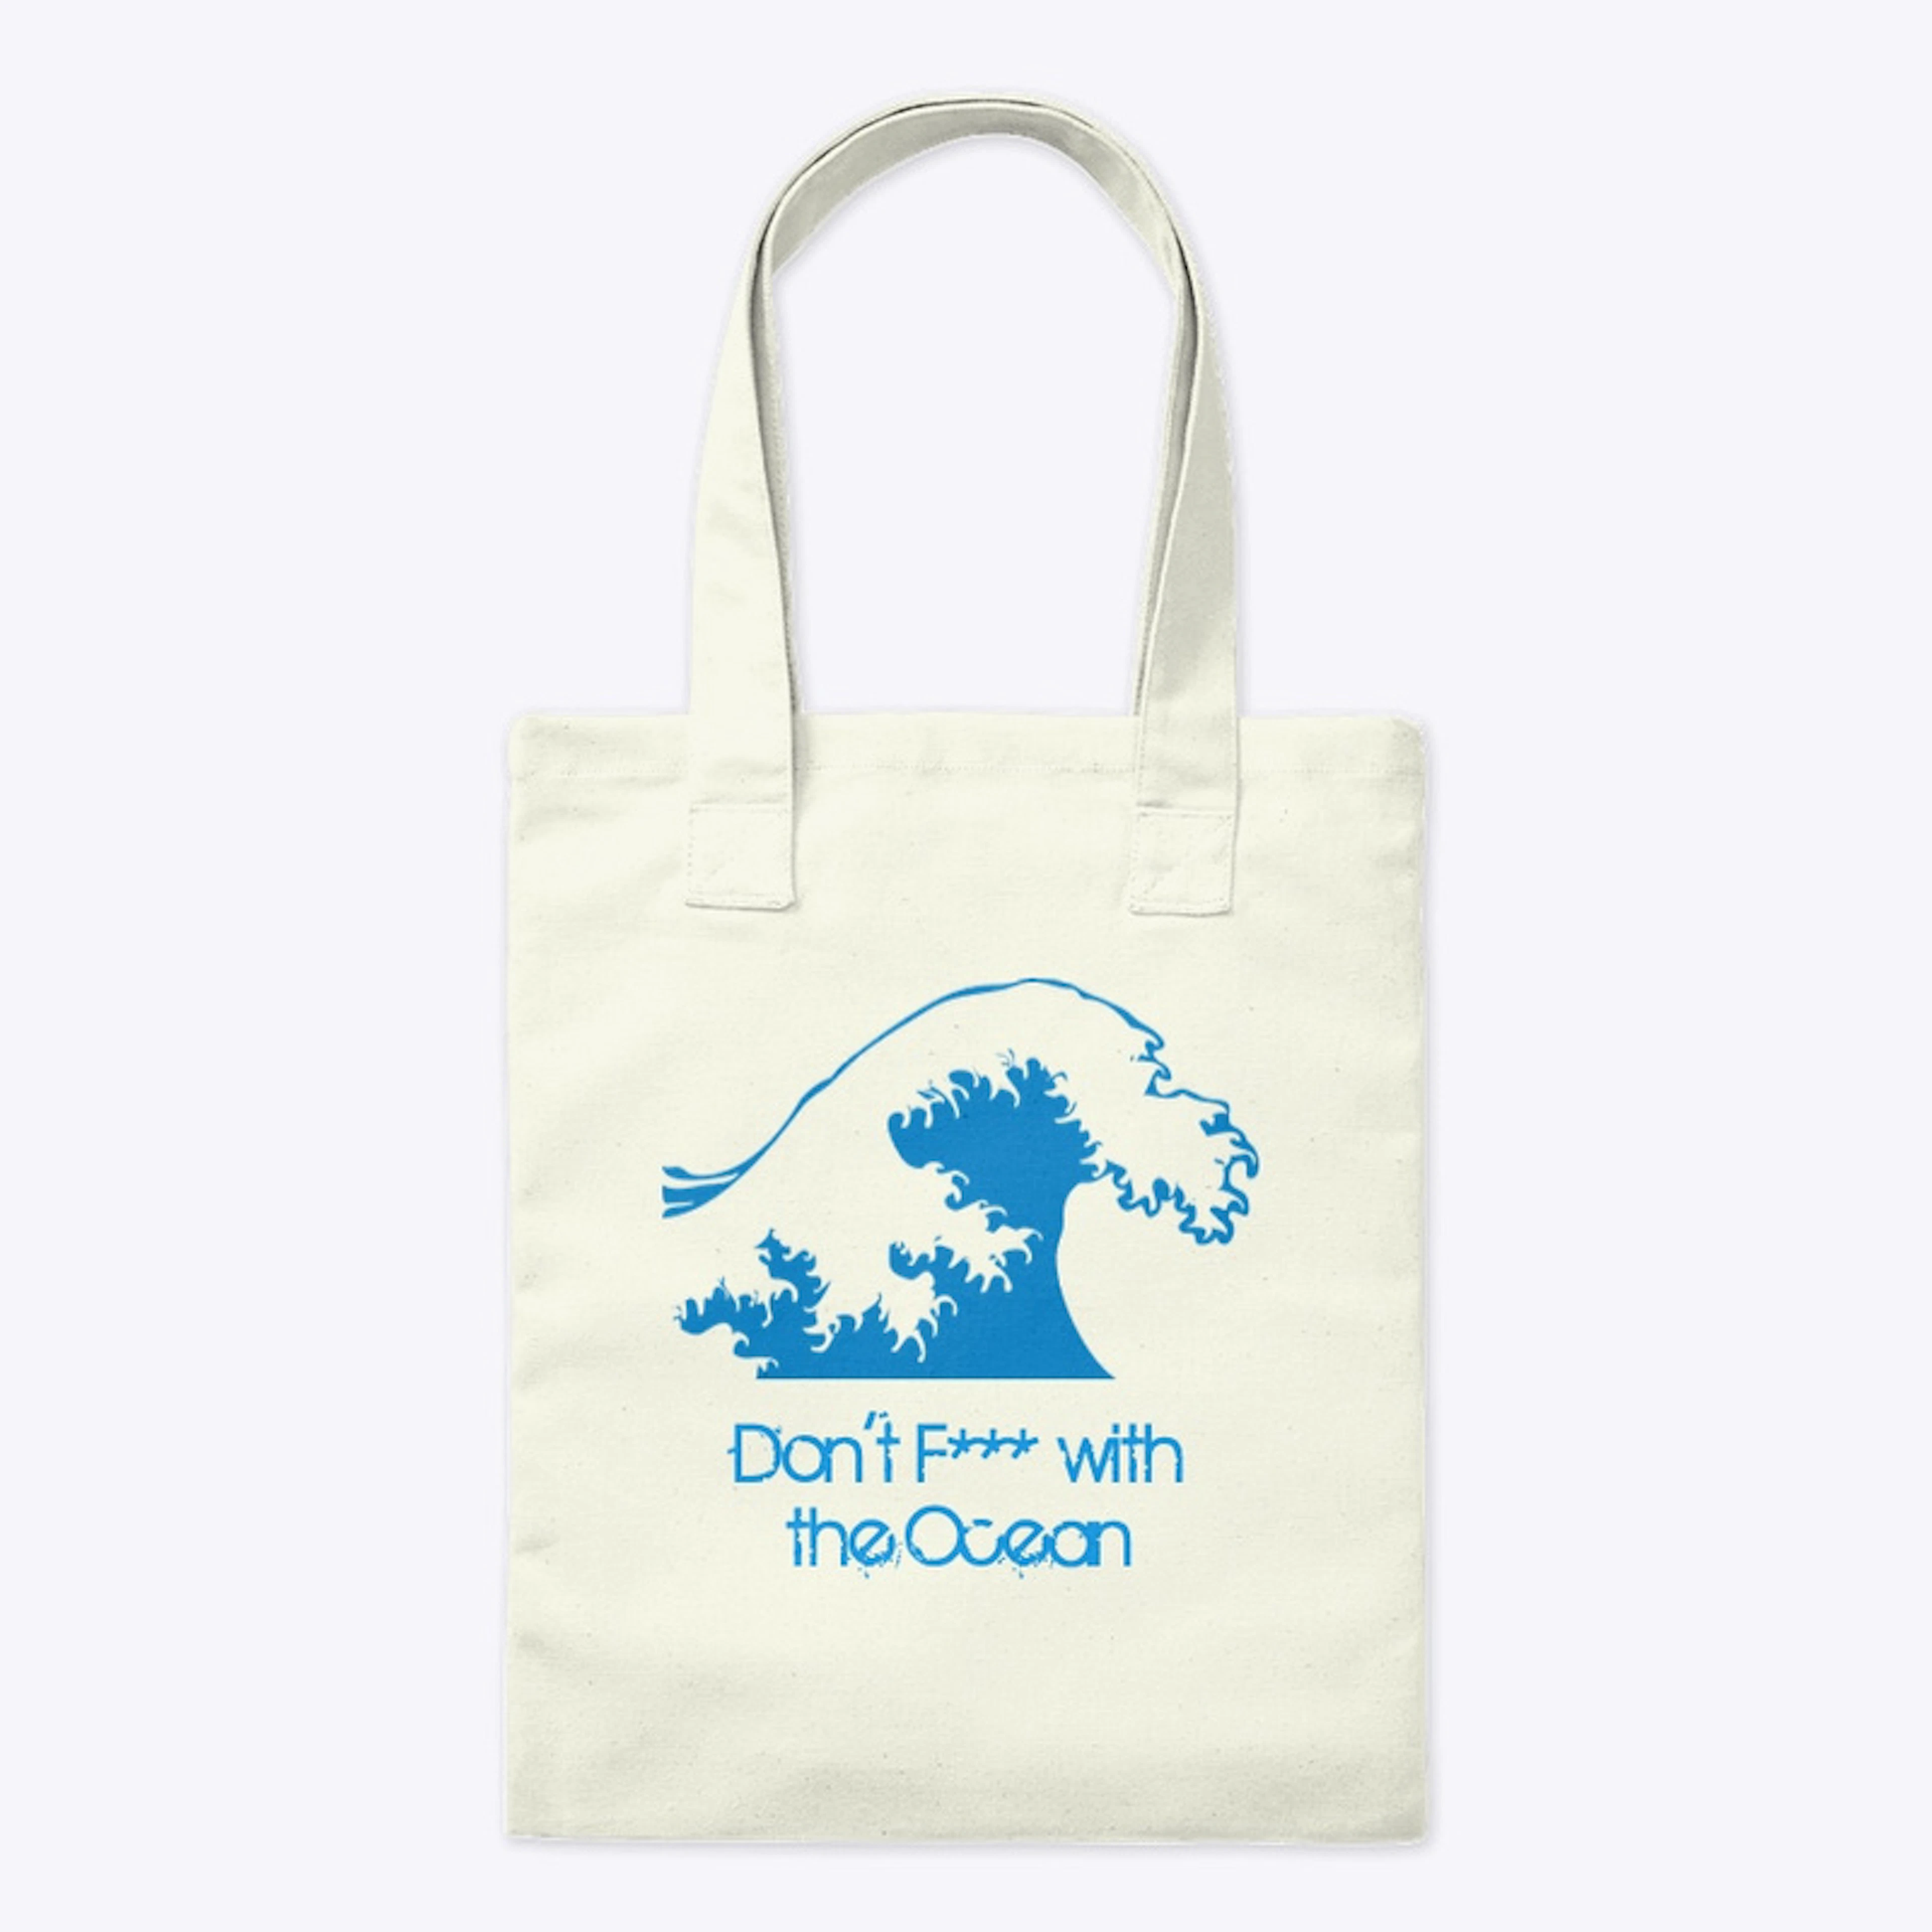 Don't F*** with the Ocean